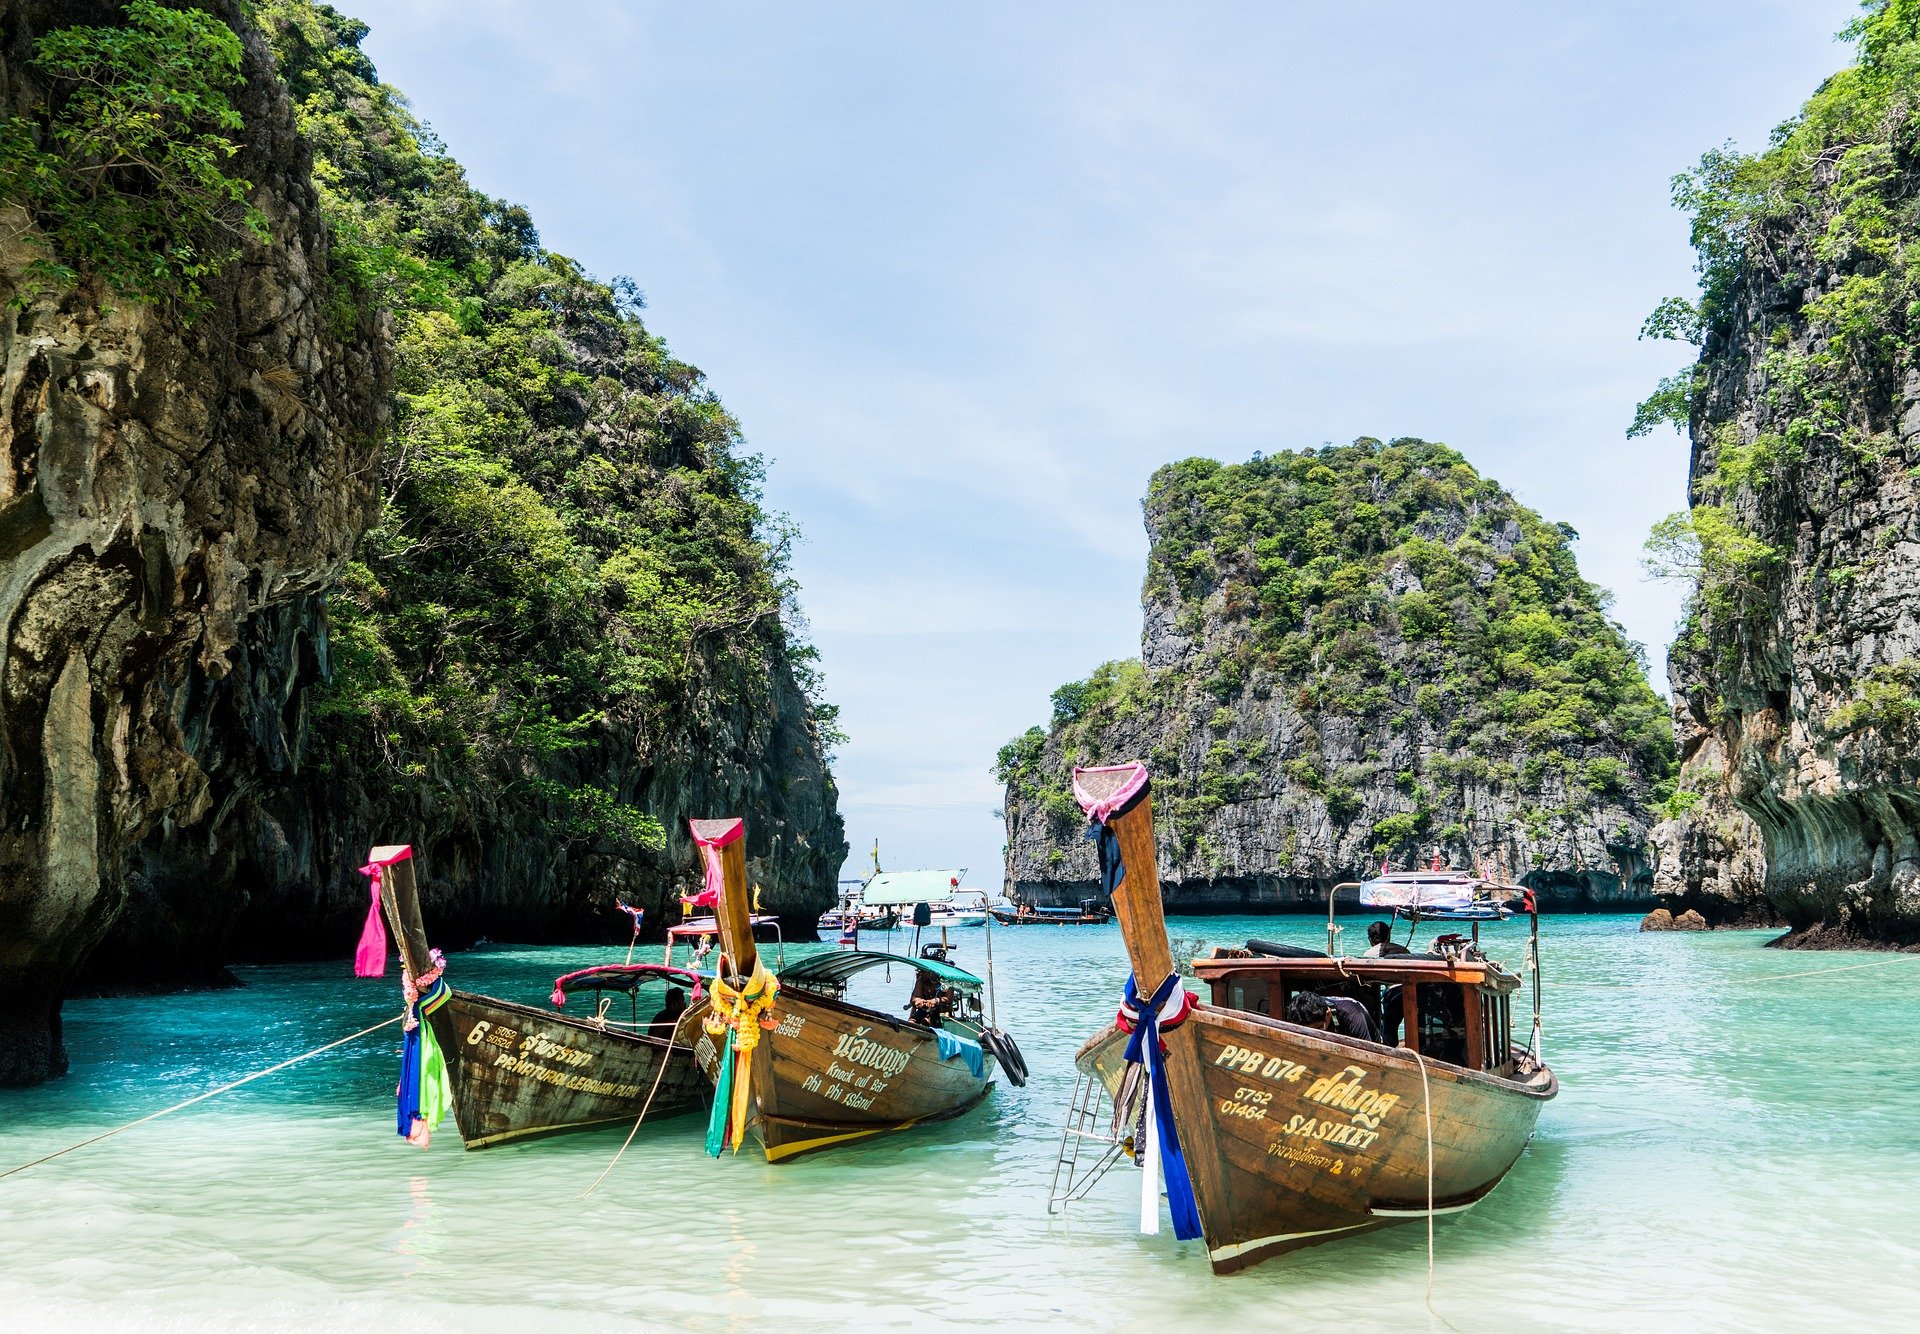 Discover The Beautiful Island Of Phuket On The Wonders Of Vietnam, Cambodia & Thailand 15 Day Package Tour_91